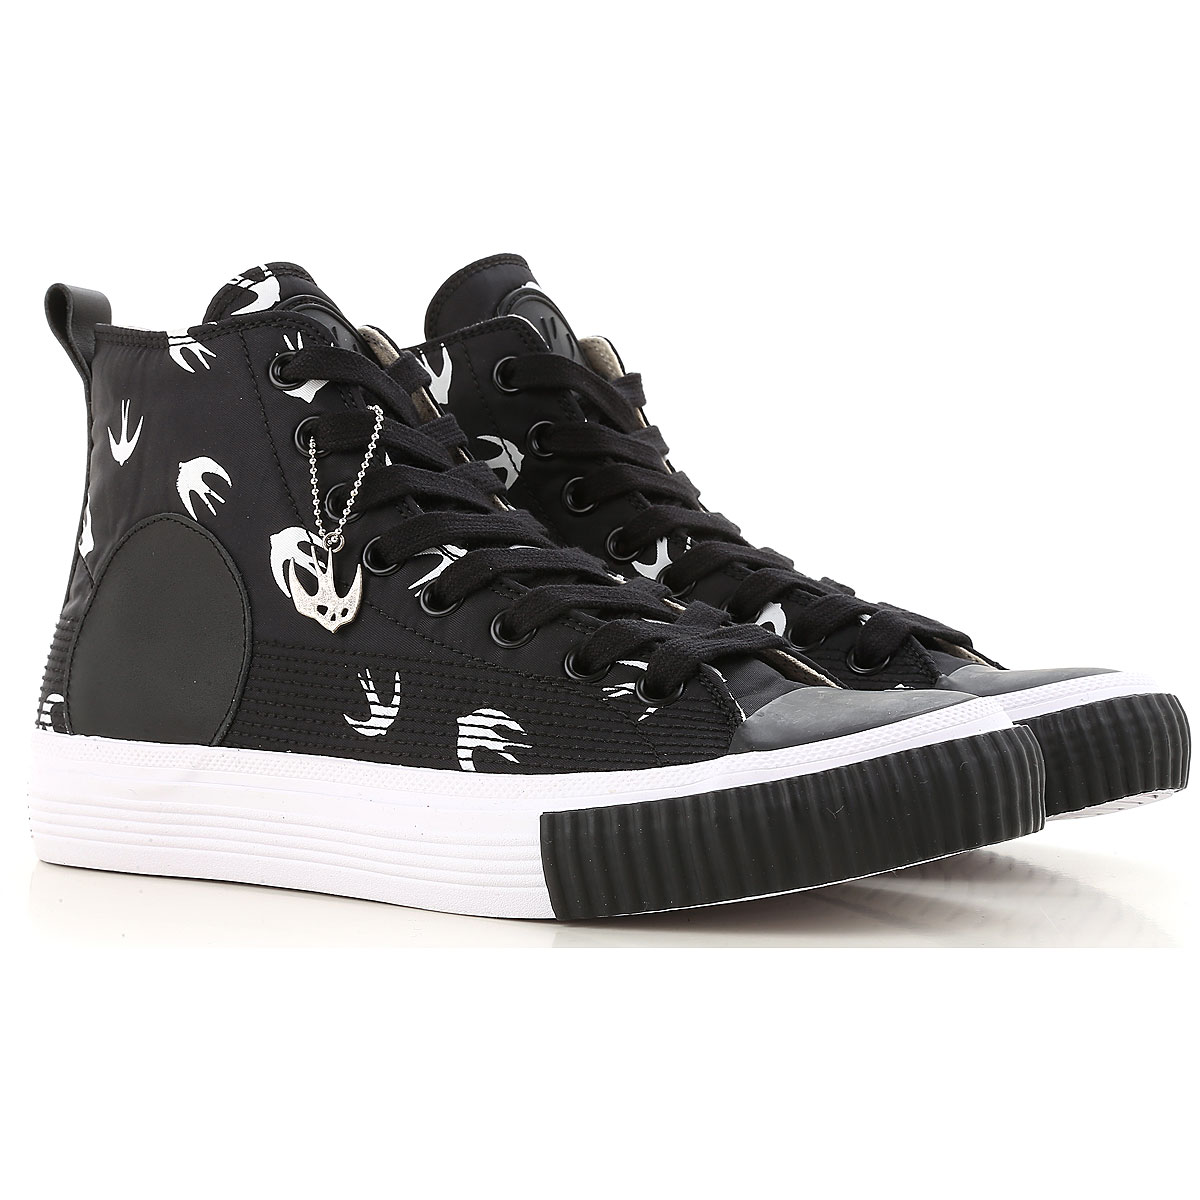 Mens Shoes Alexander McQueen McQ, Style code: 472454-r1159-1070